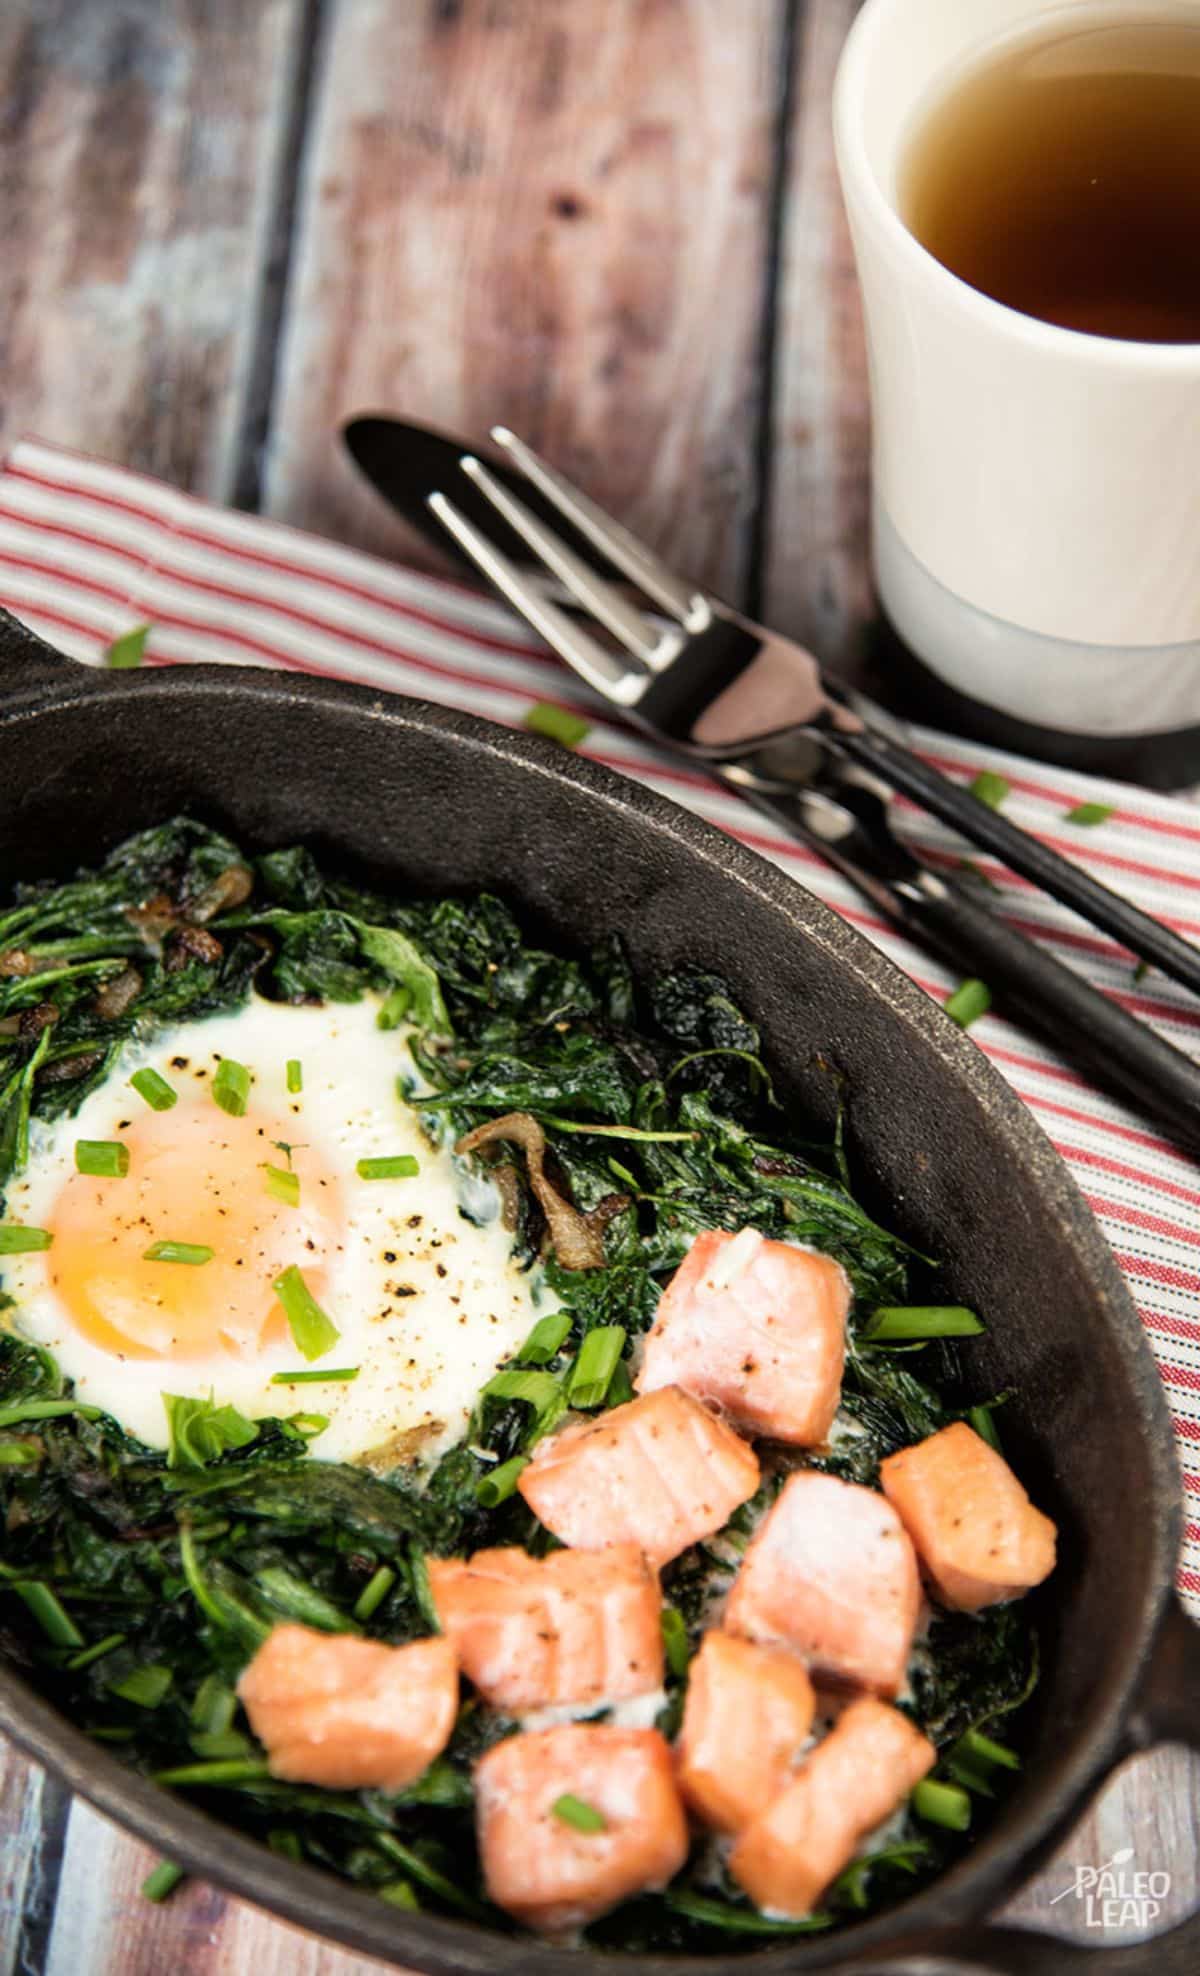 Baked Eggs With Spinach And Smoked Salmon